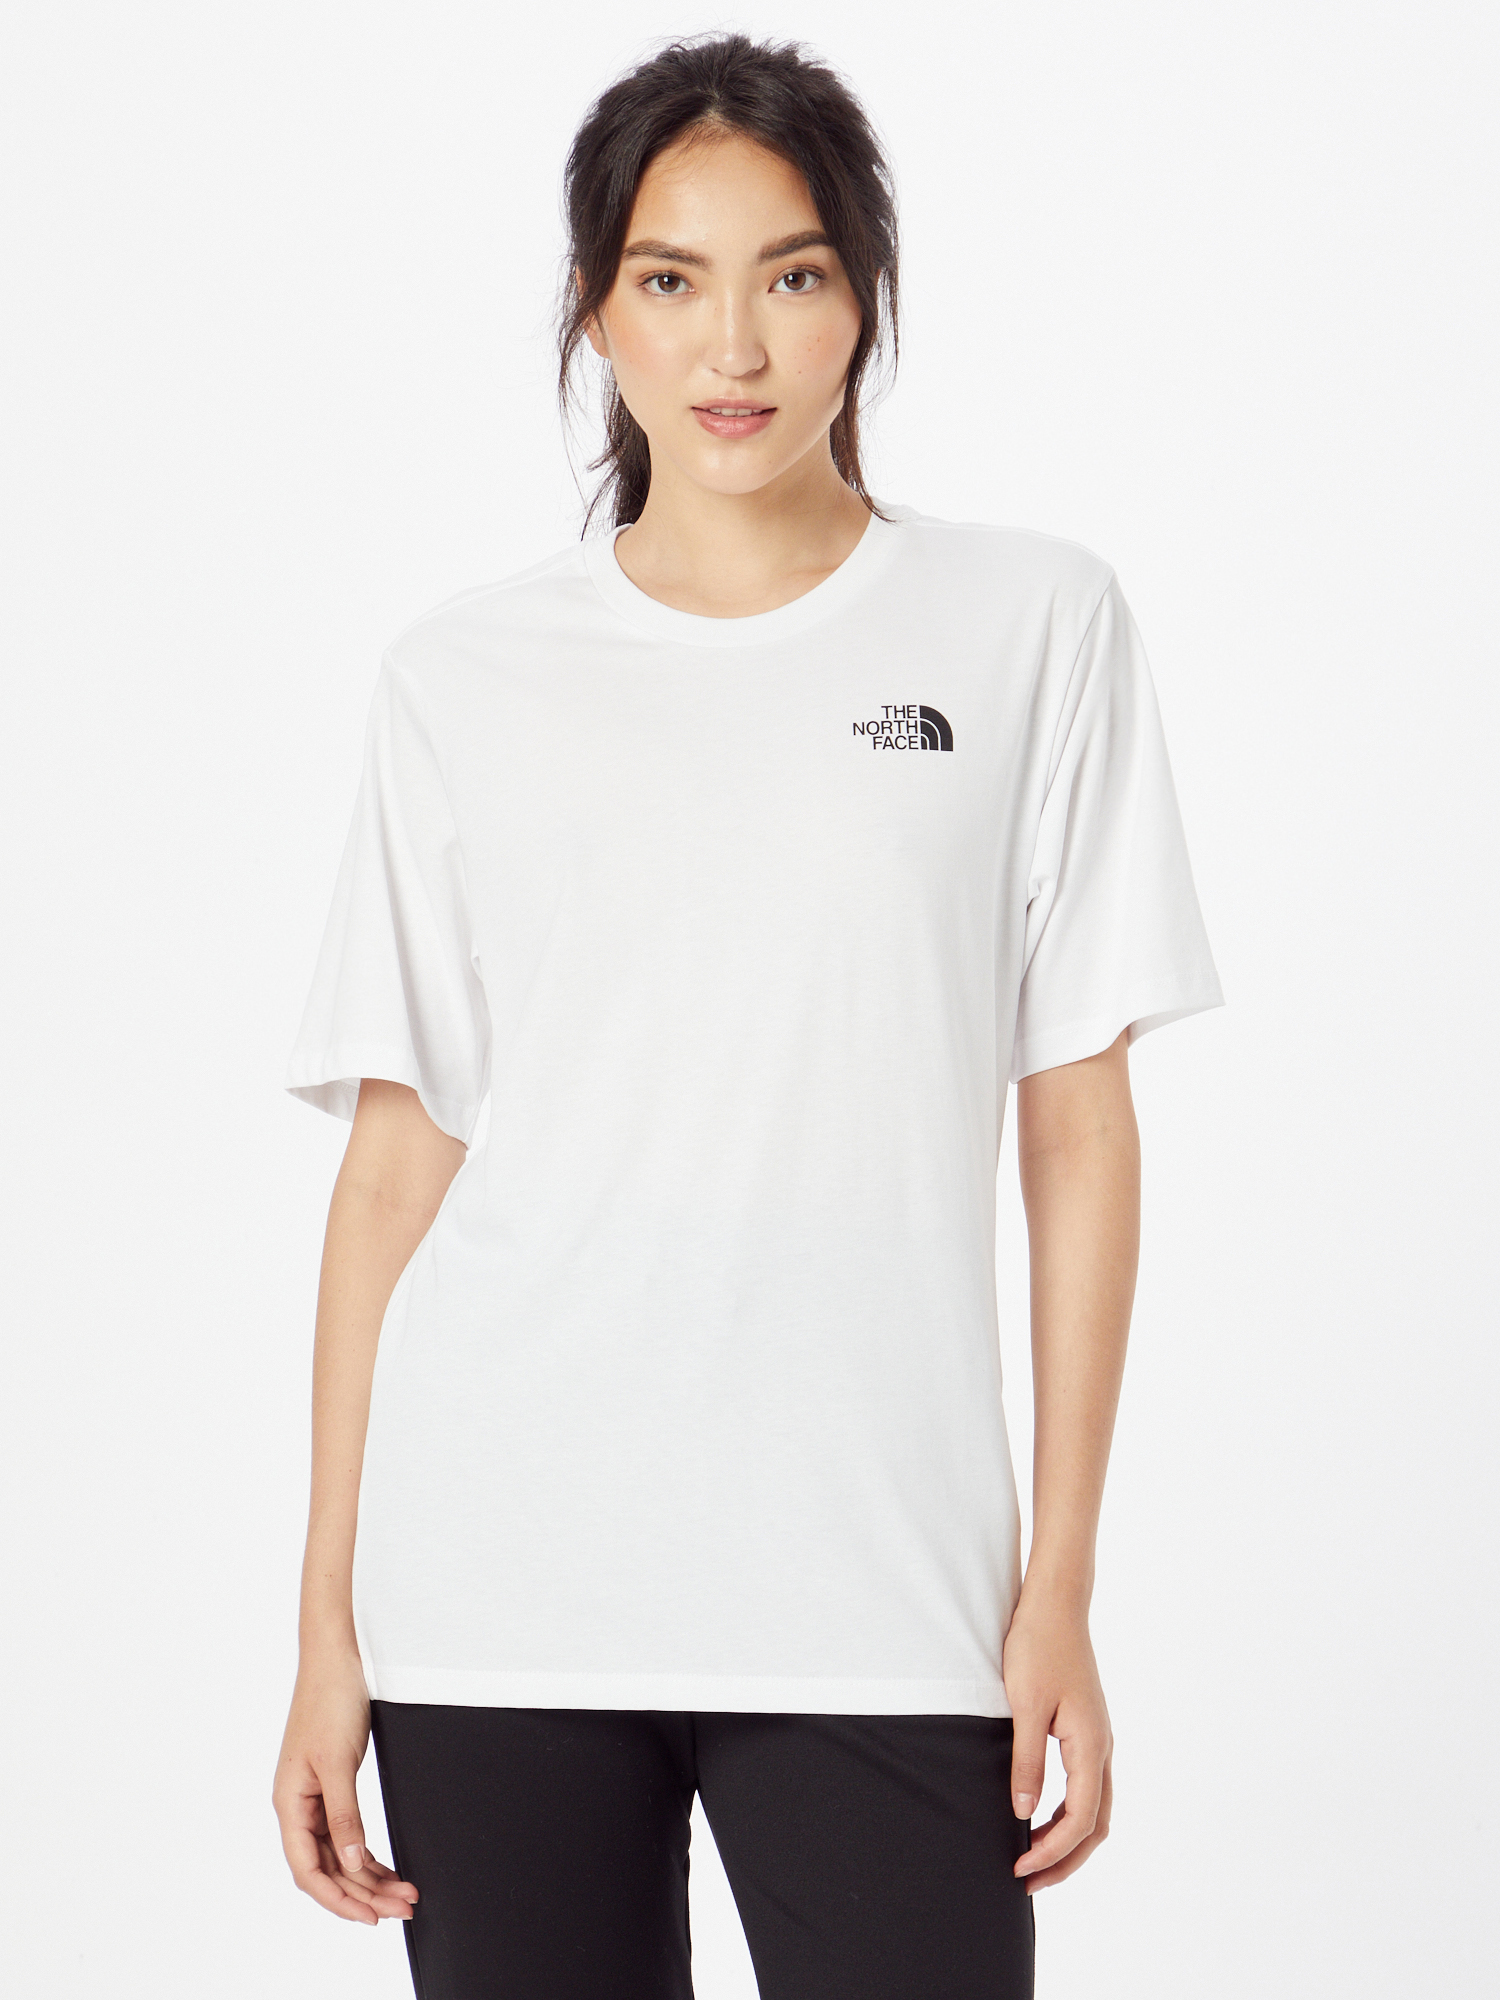 THE NORTH FACE T-Shirt SIMPLE DOME in Weiß 